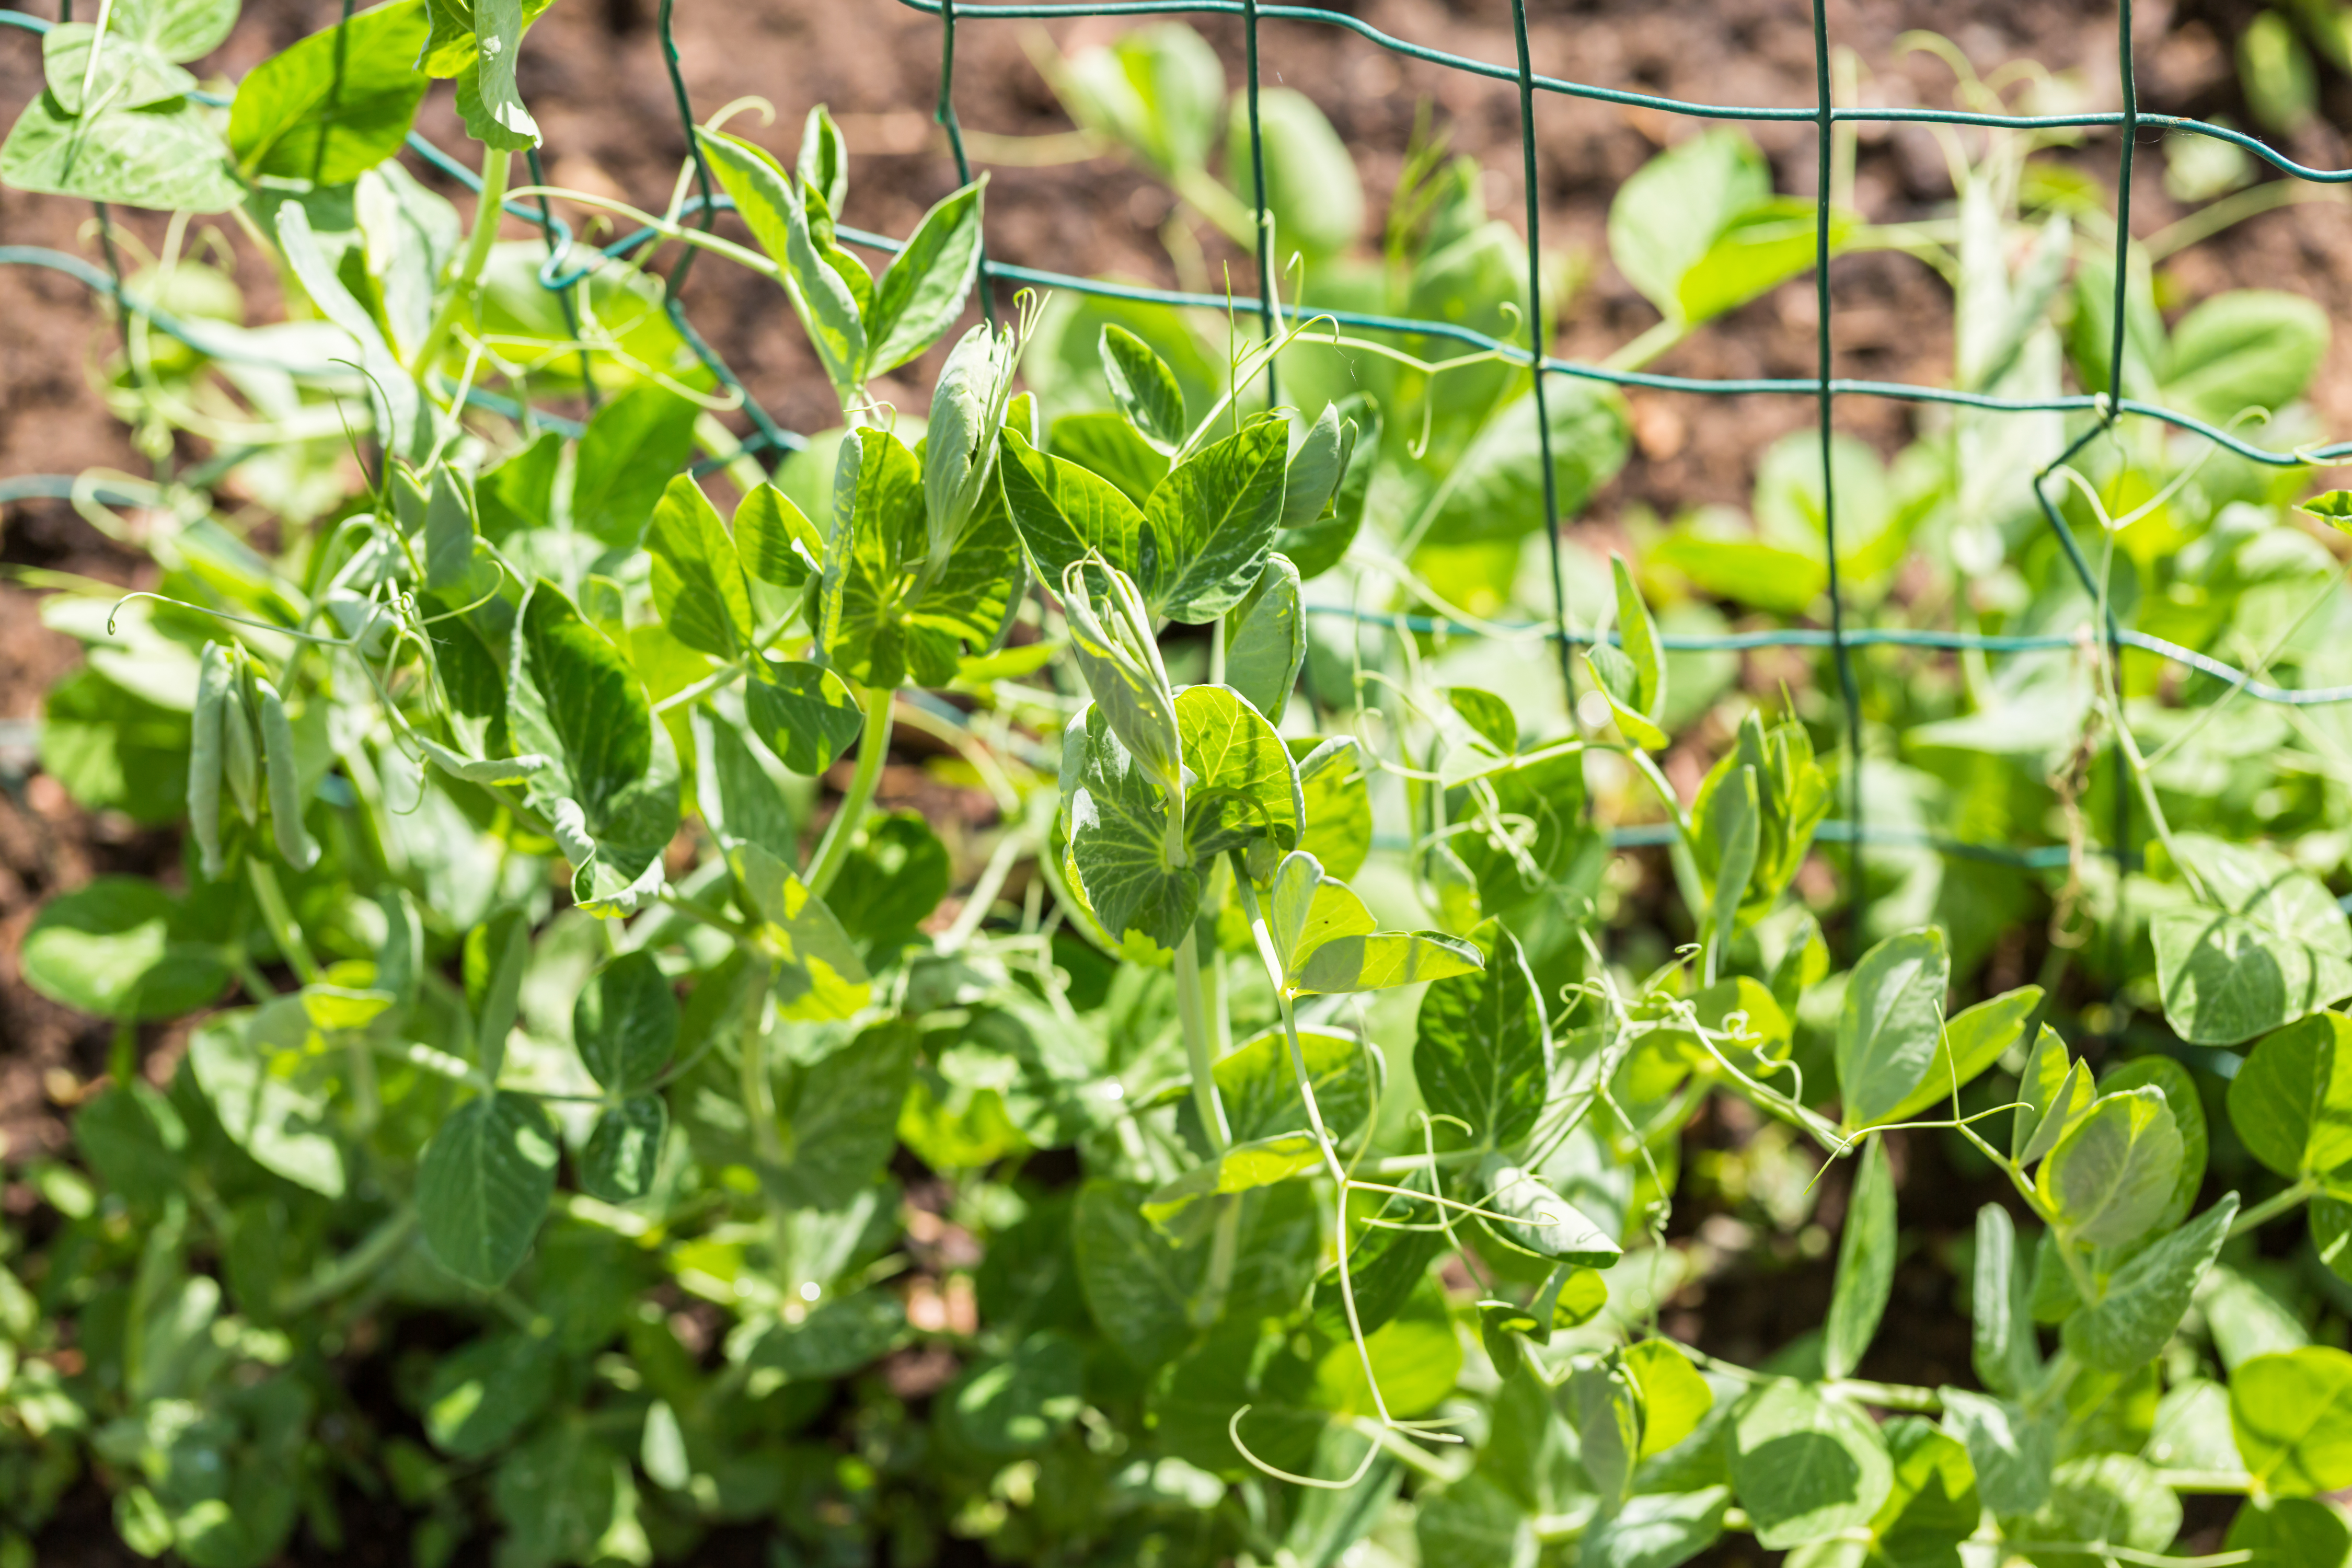 Young pea plants climbing up a mesh trellis in the sun